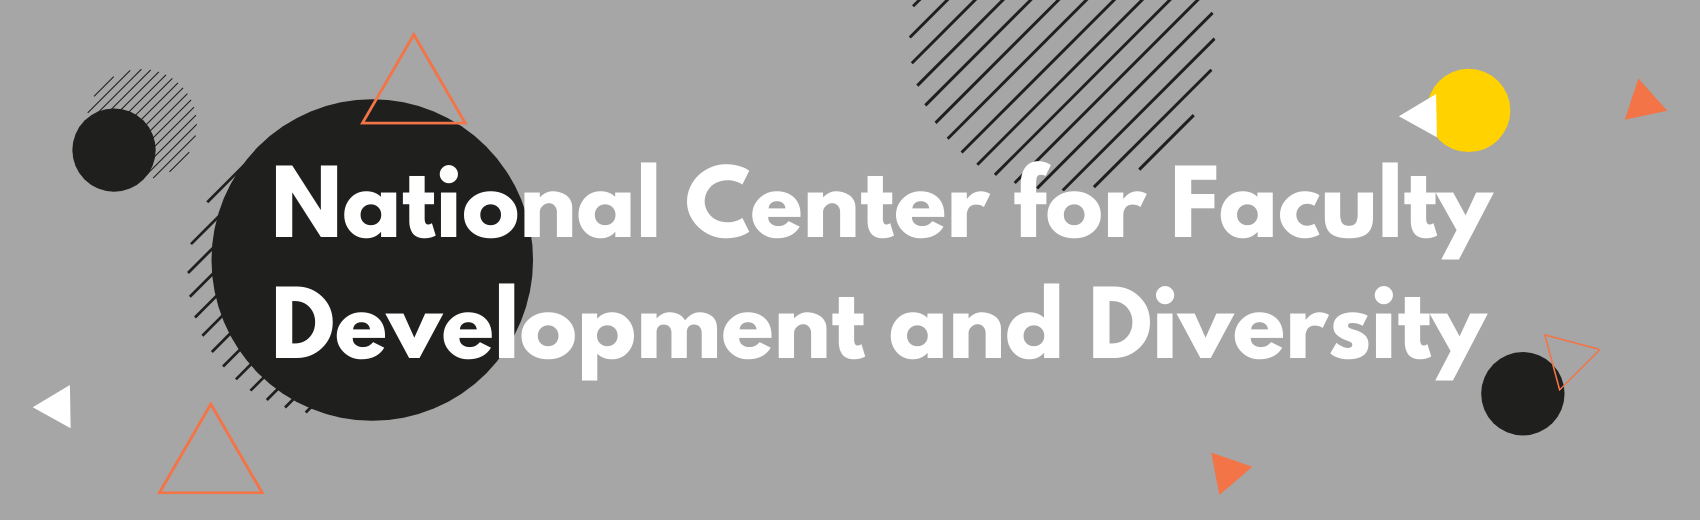 National-Center-for-Faculty-Development-and-Diversity-Banner.png